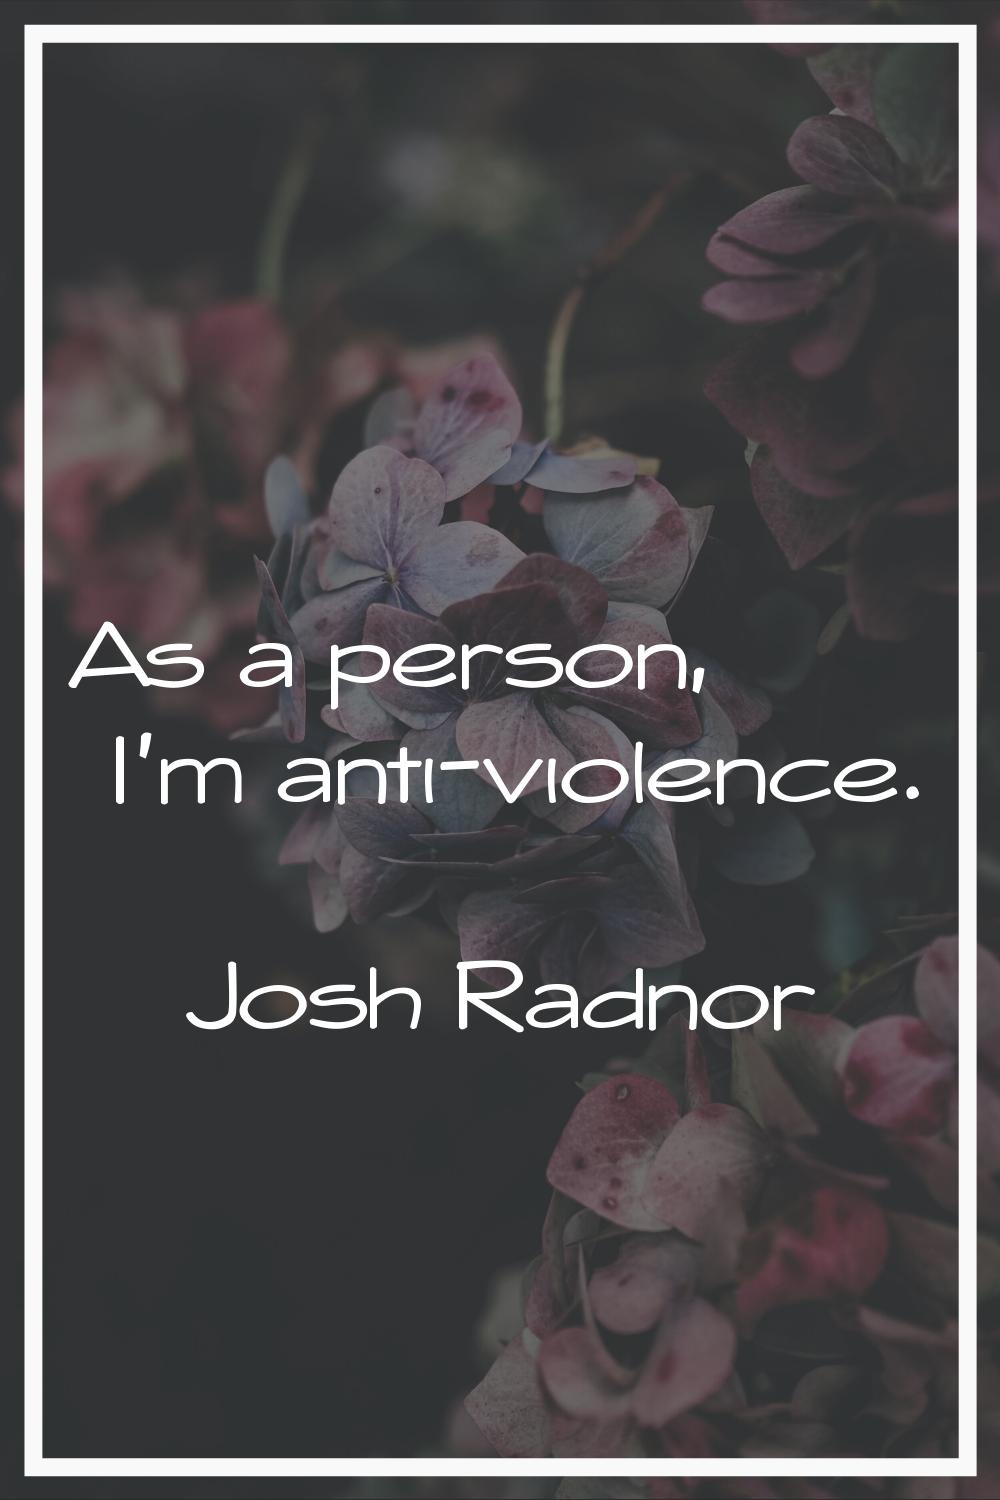 As a person, I'm anti-violence.